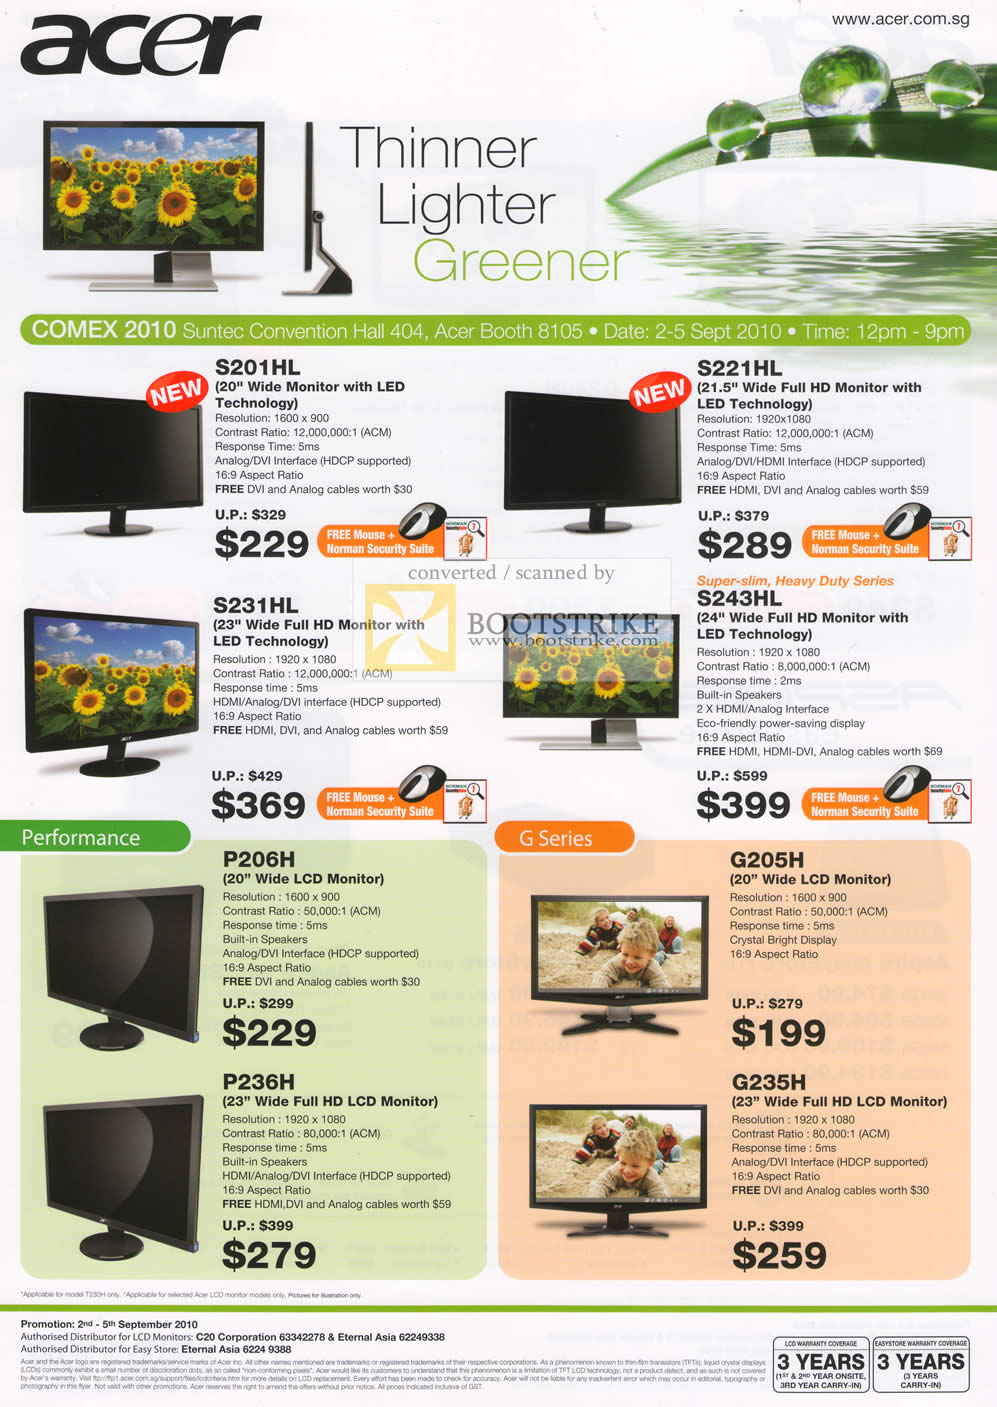 Comex 2010 price list image brochure of Acer LED Monitors S201HL S221HL S231HL S243HL LCD P206H G205H P236H G235H